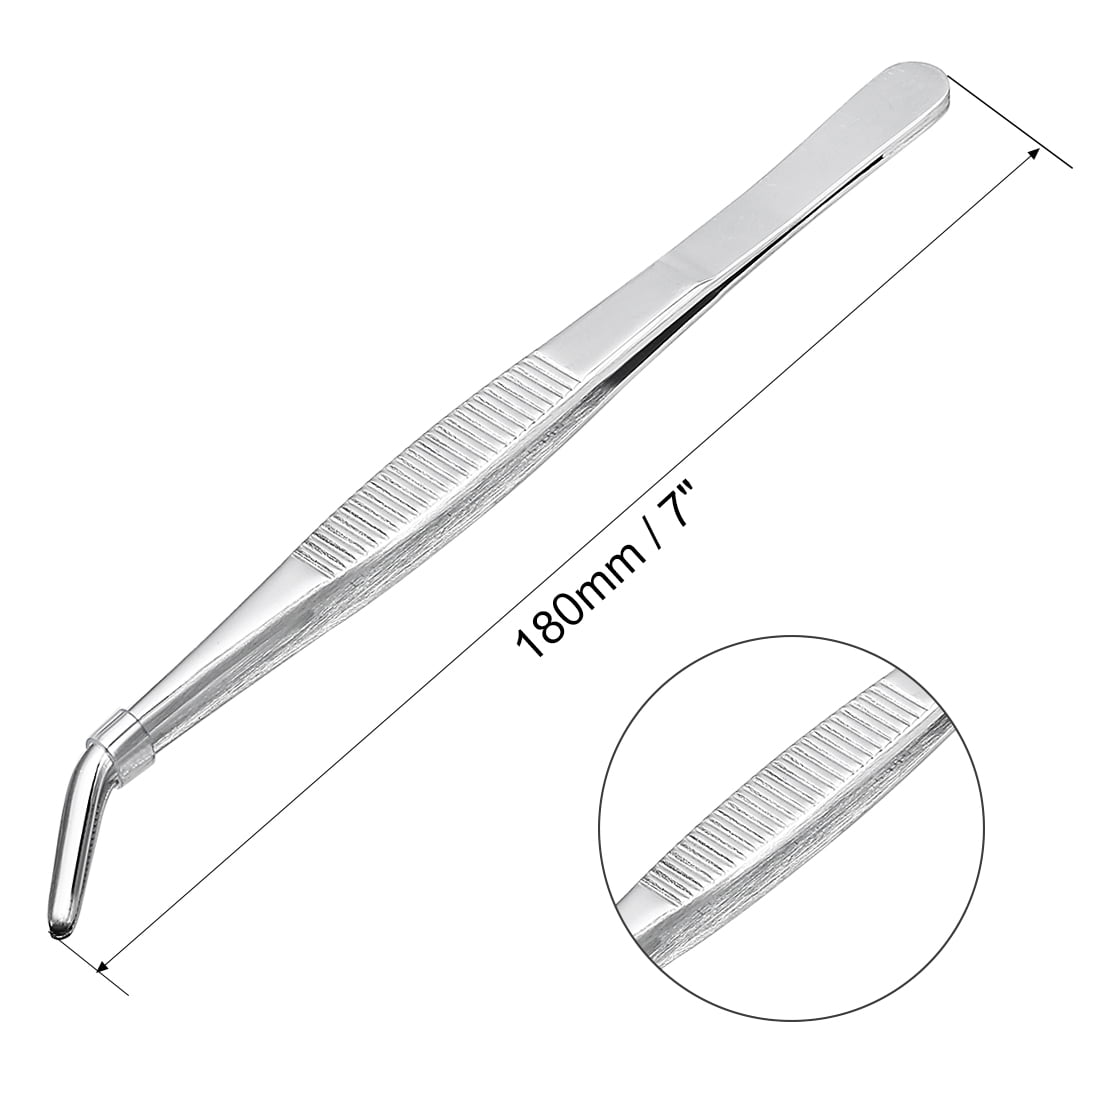 uxcell 10-Inch Stainless Steel Tweezers with Curved Serrated Tip